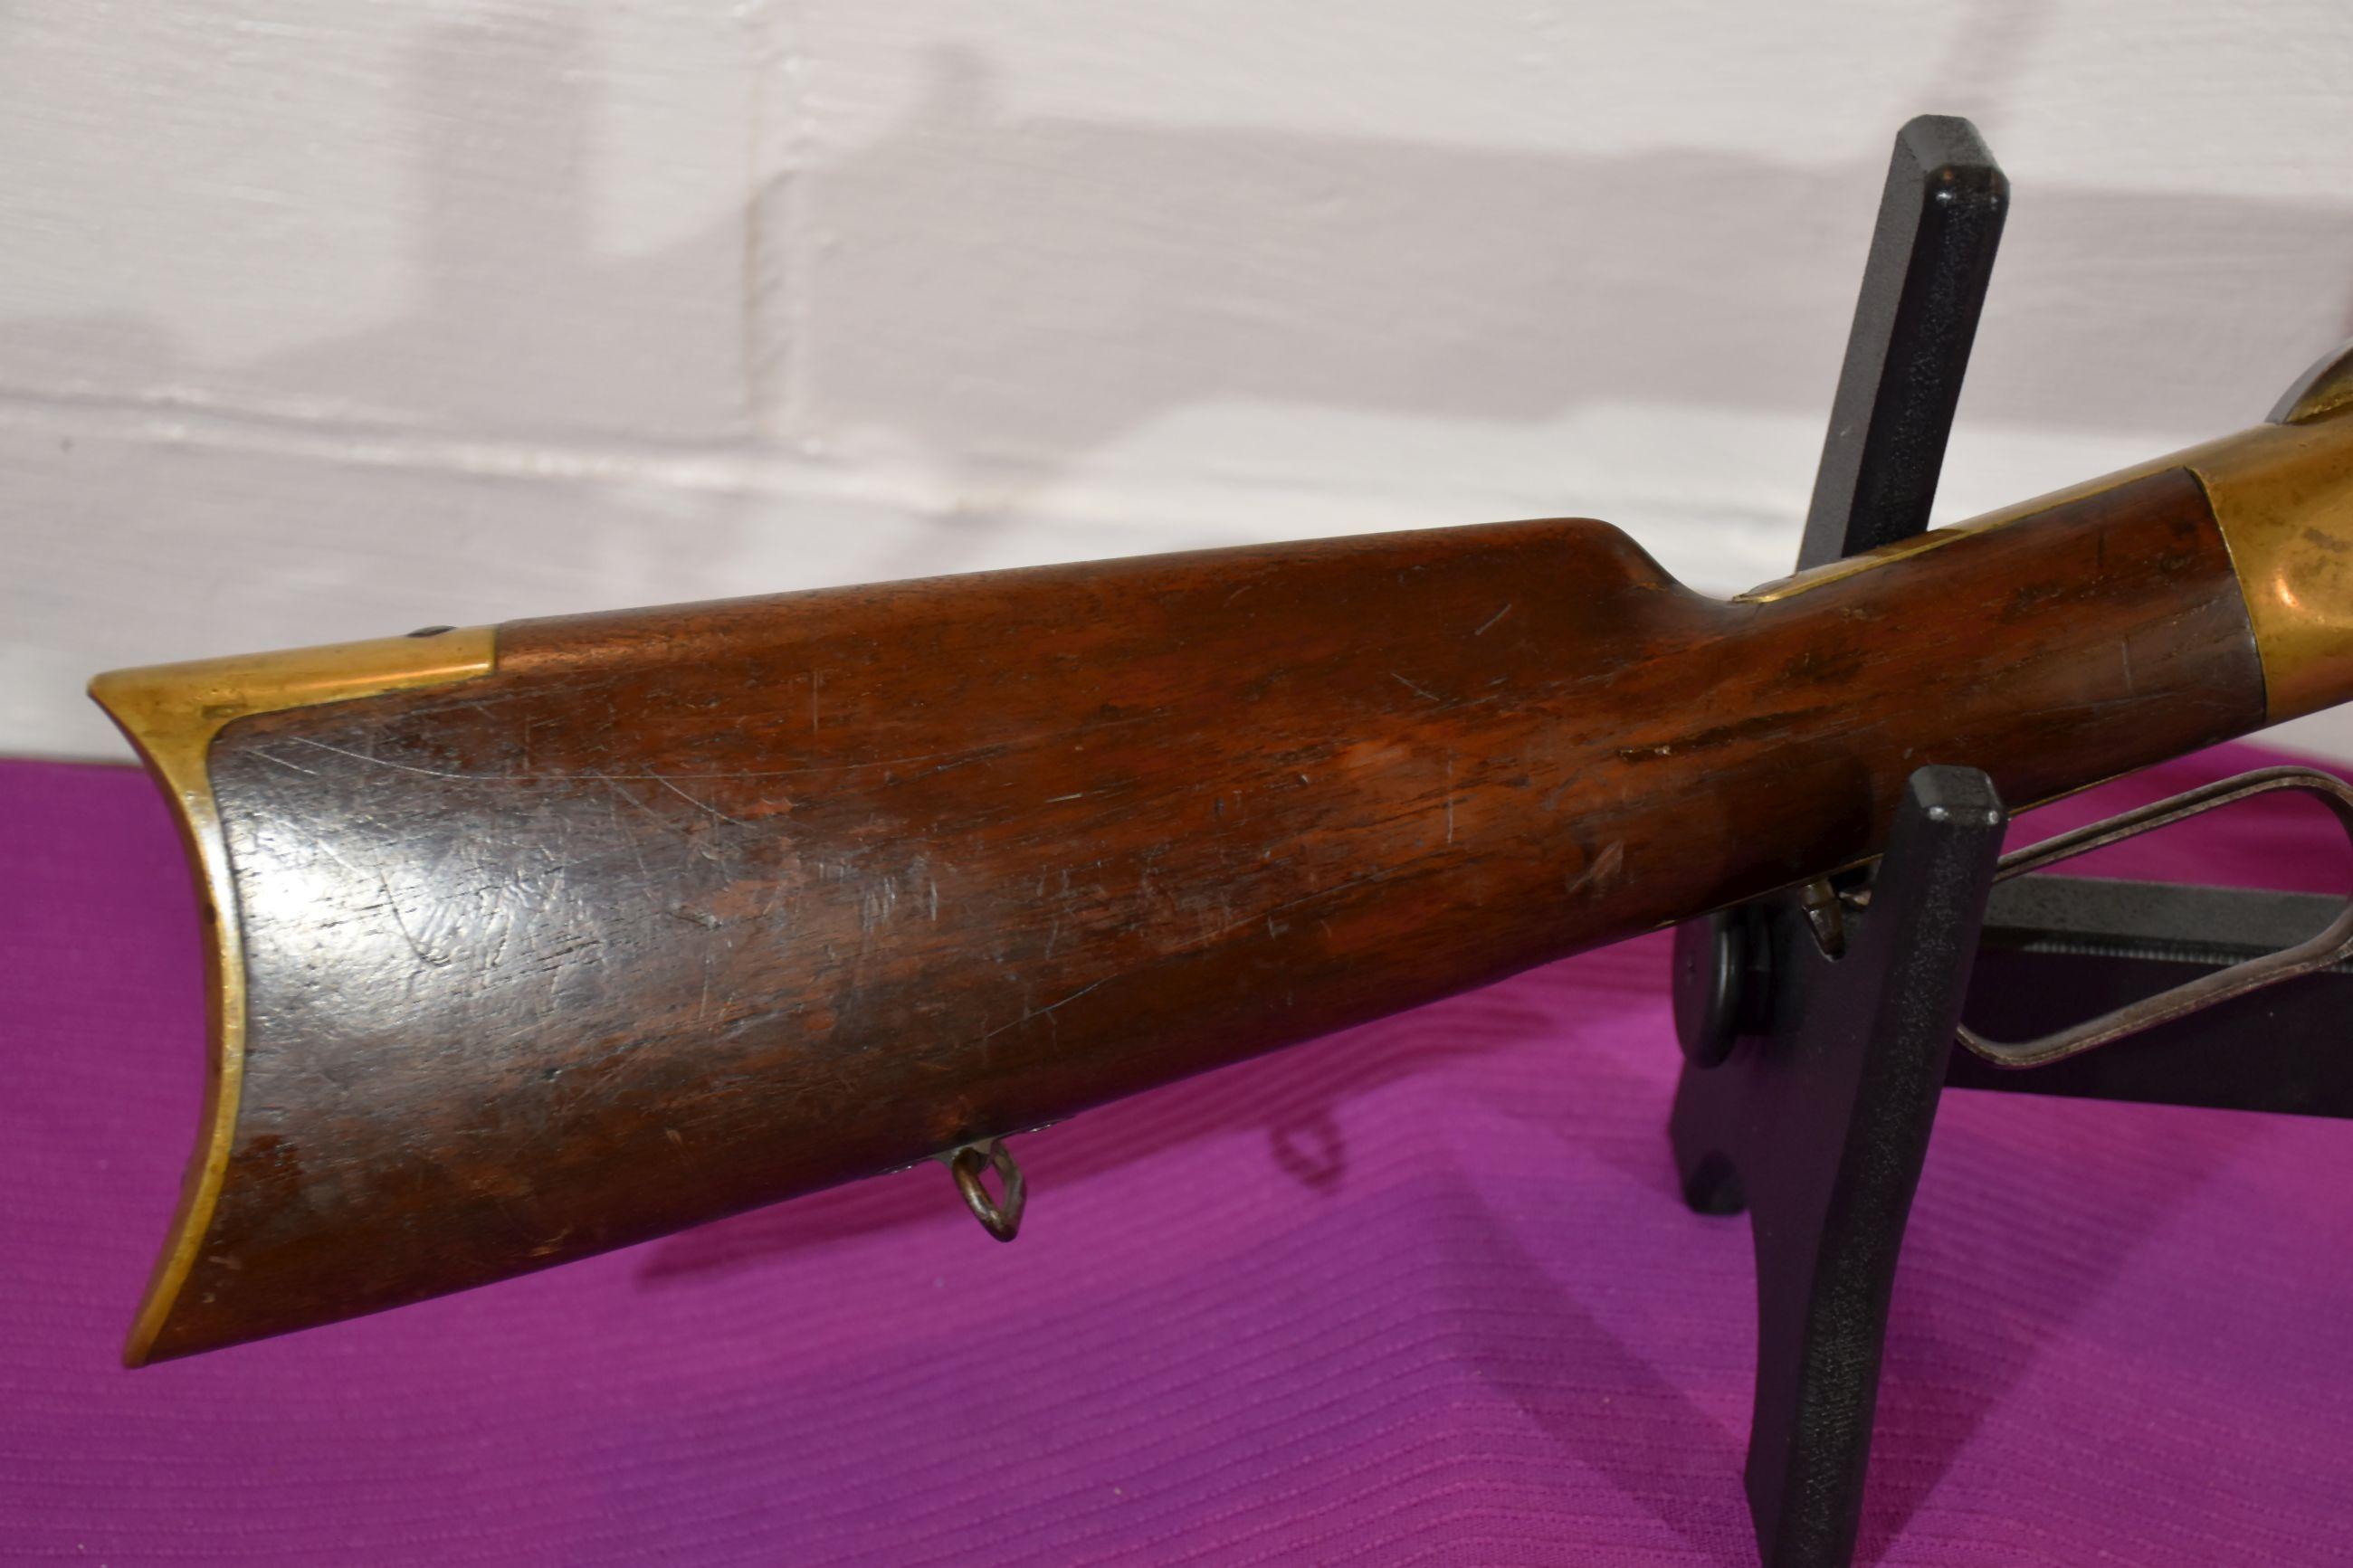 Winchester Model 1866 Sporting Rifle in .44 Rim Fire, SN: 119040, Made in 1874. This is a very nice